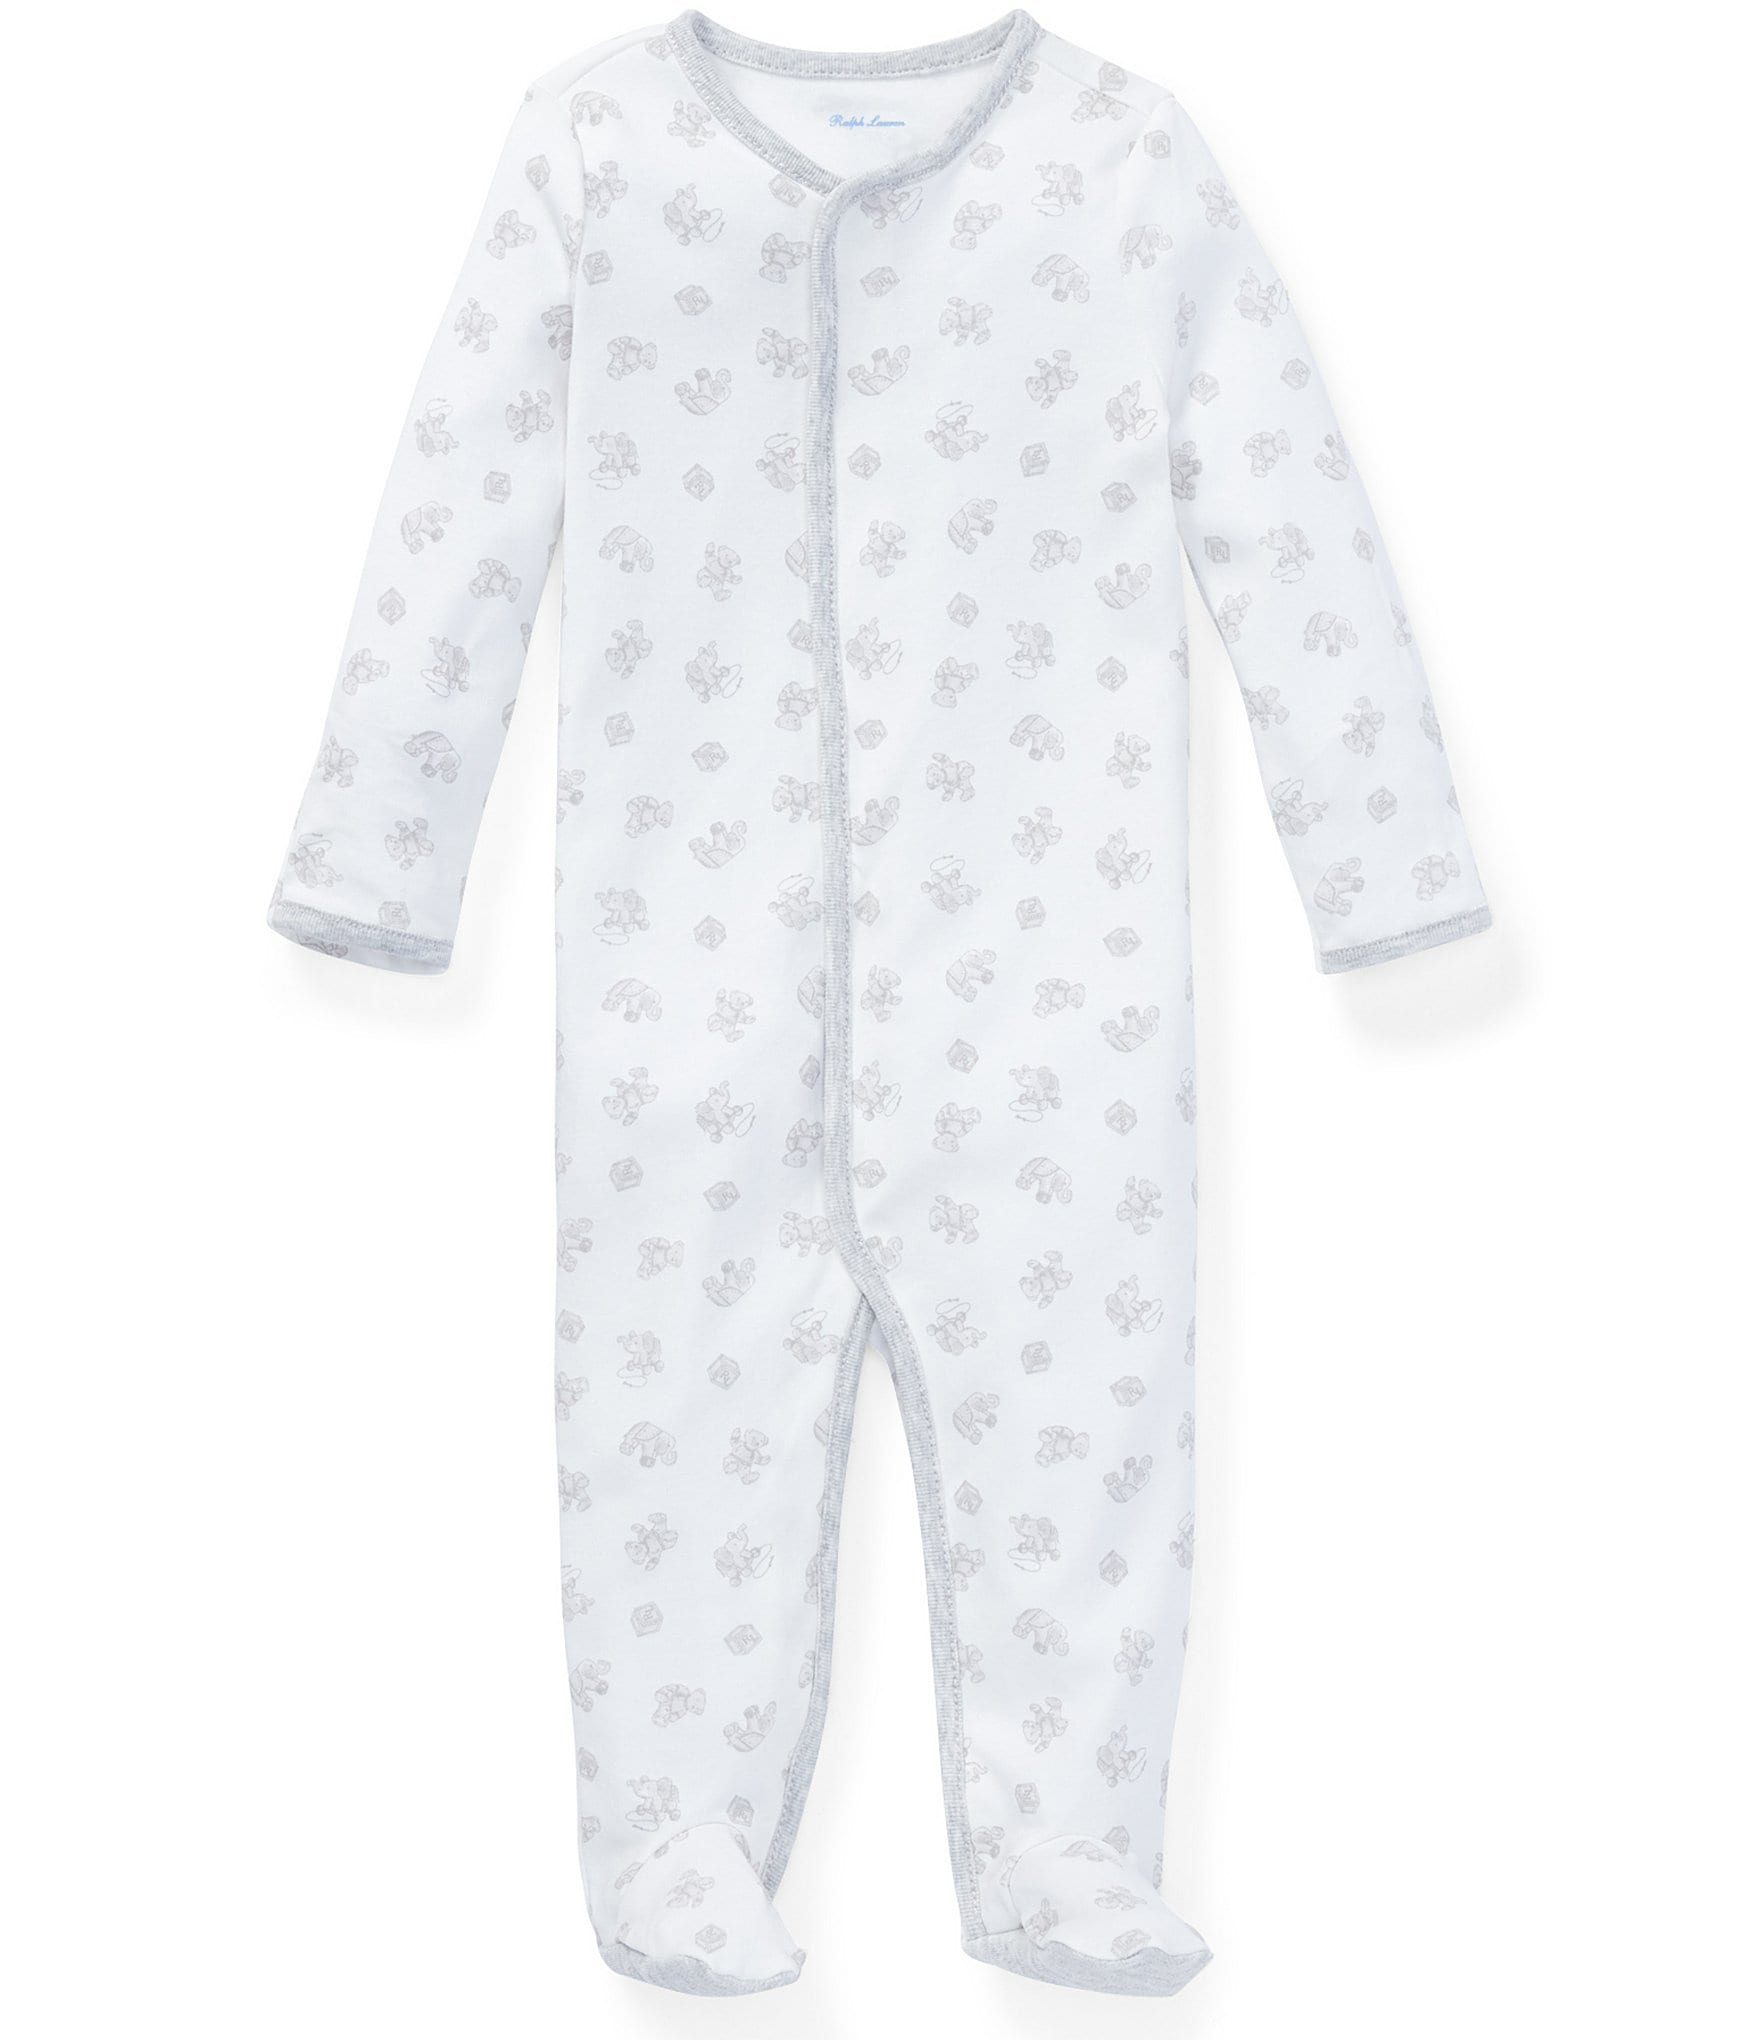 Ralph Lauren Baby Newborn-9 Months Long Sleeve Printed Footed Coverall ...